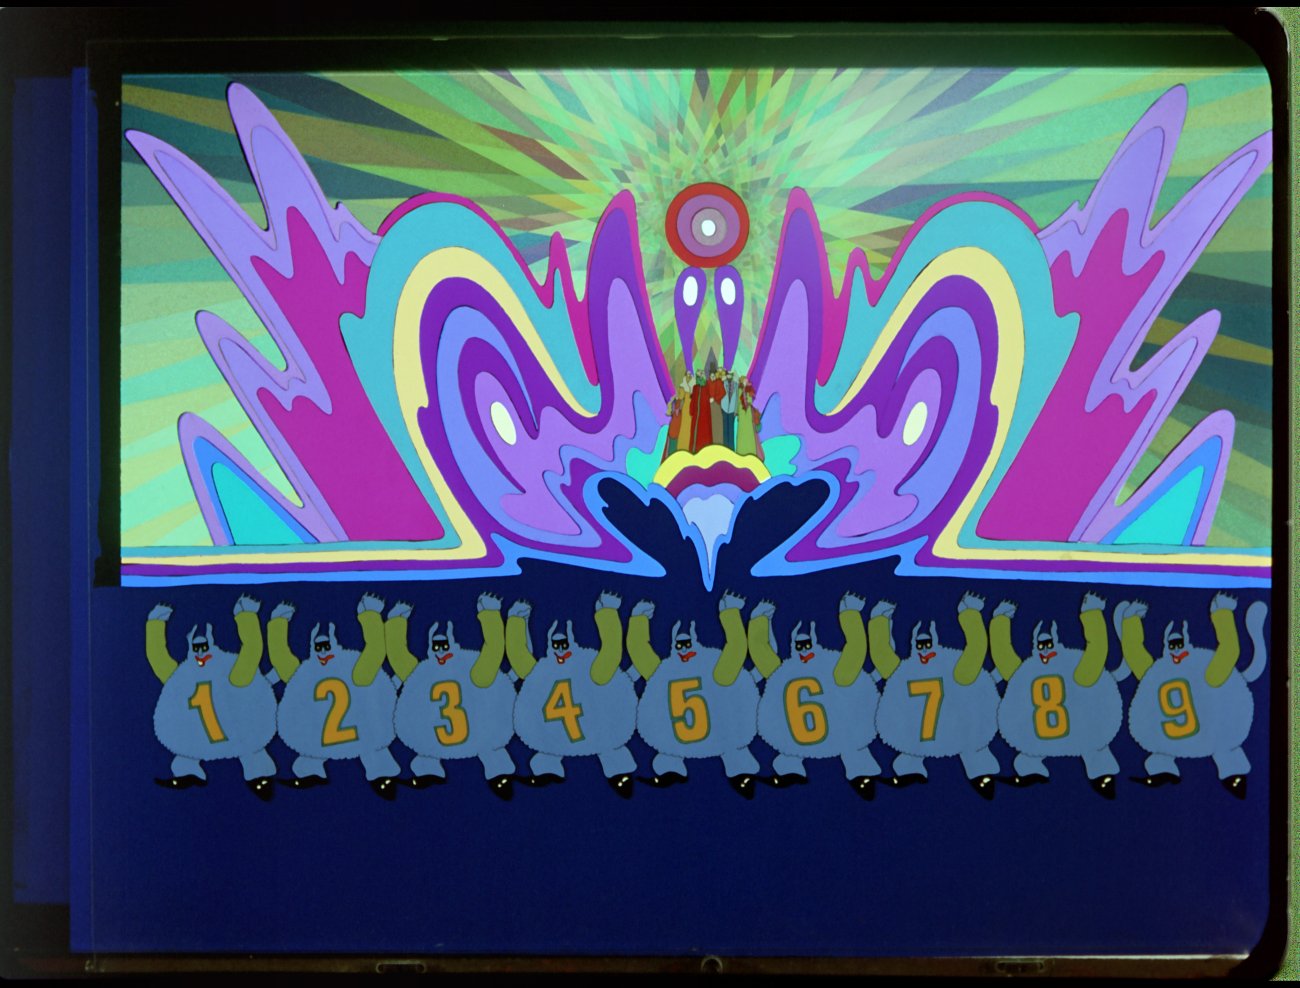 "It's All Too Much" sequence from Yellow Submarine